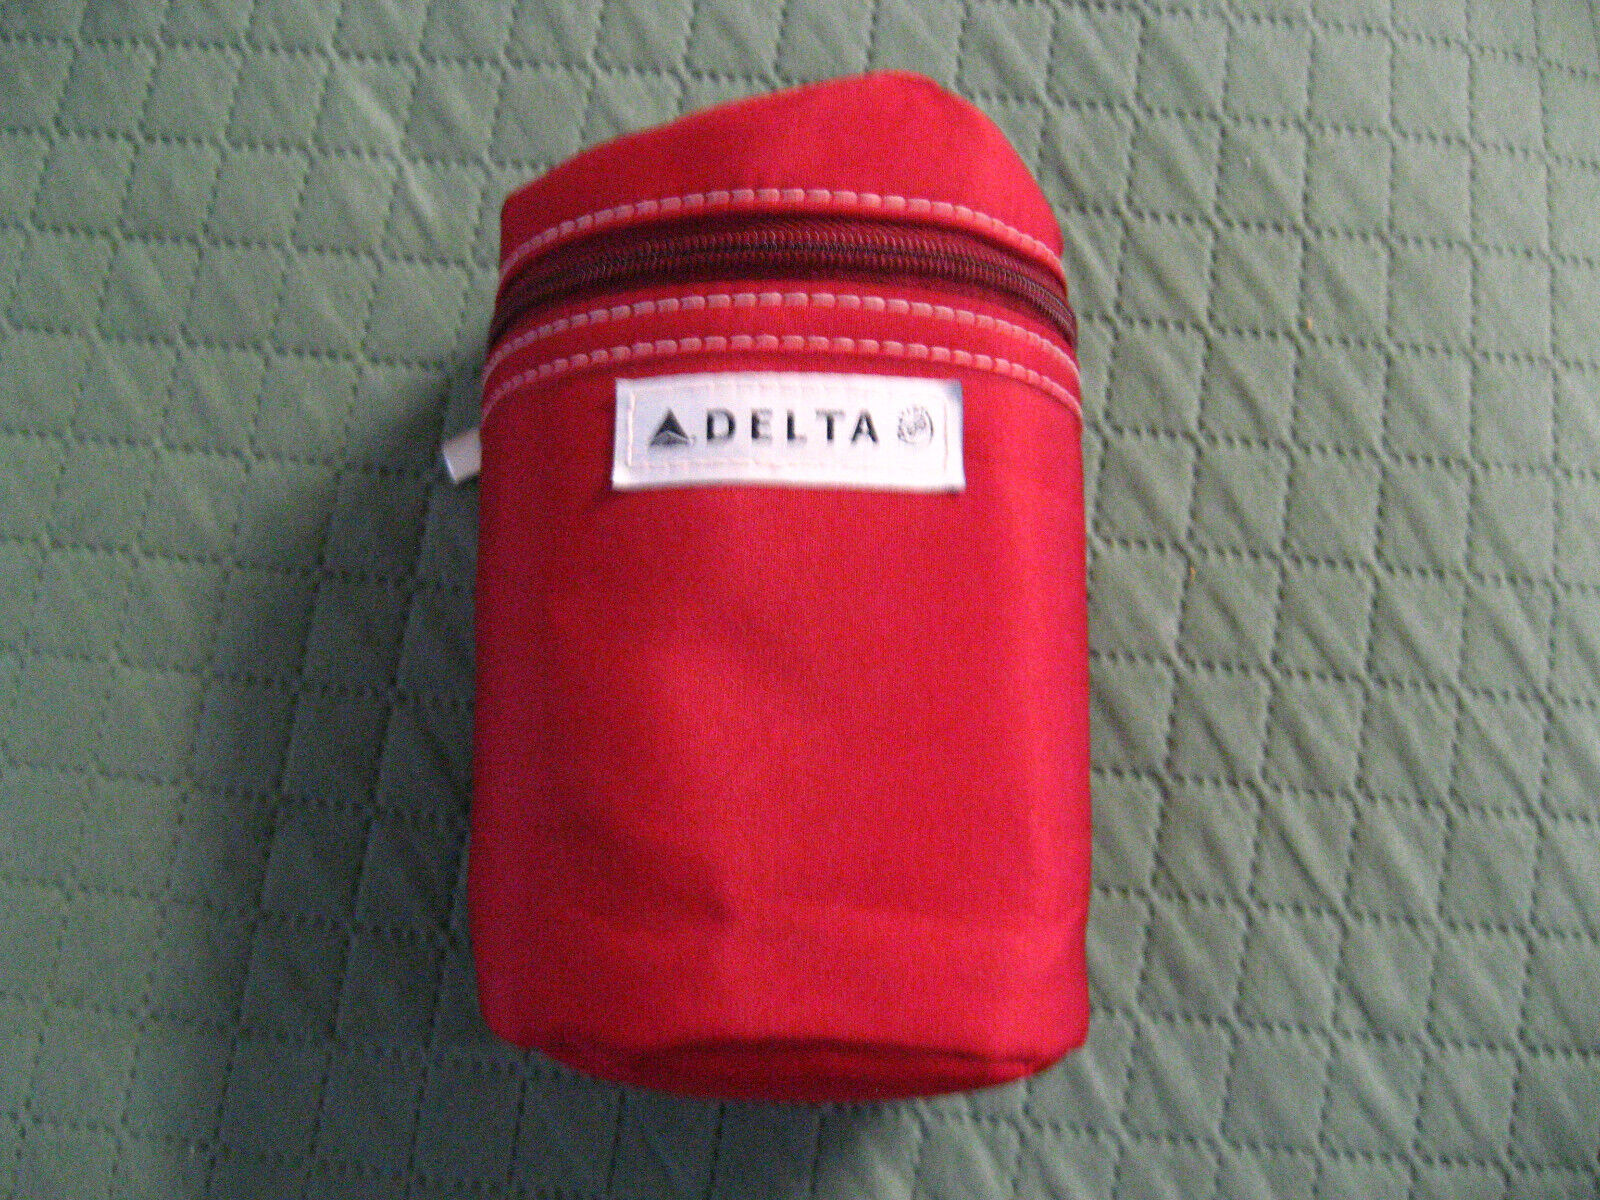 Delta Airlines Amenity Kit - DAL Red Air Line First Business Class Toiletry Bag